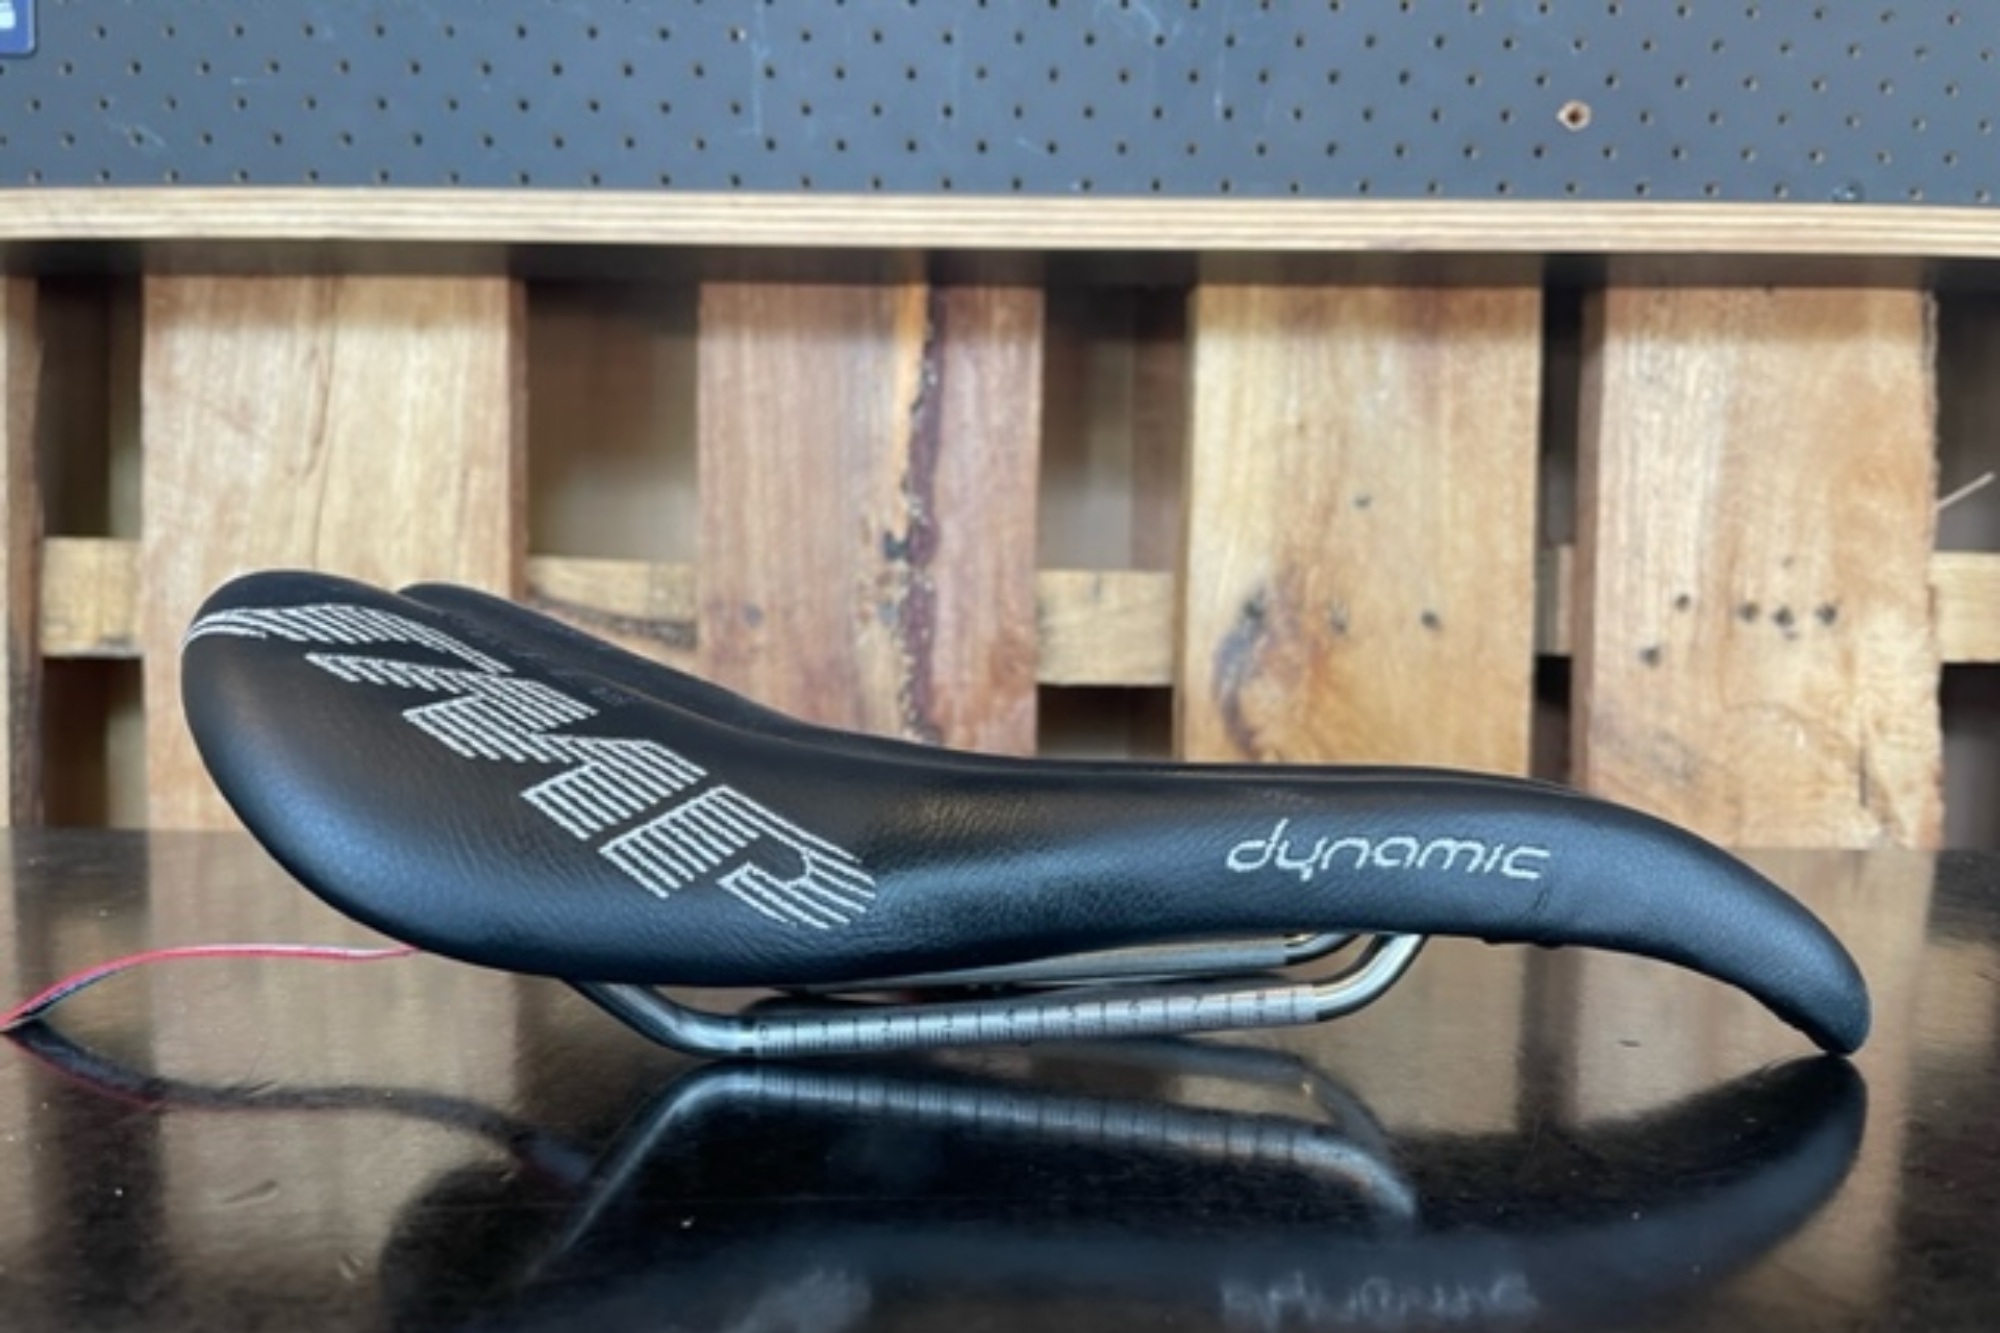 Image shows the SMP Dynamic saddle